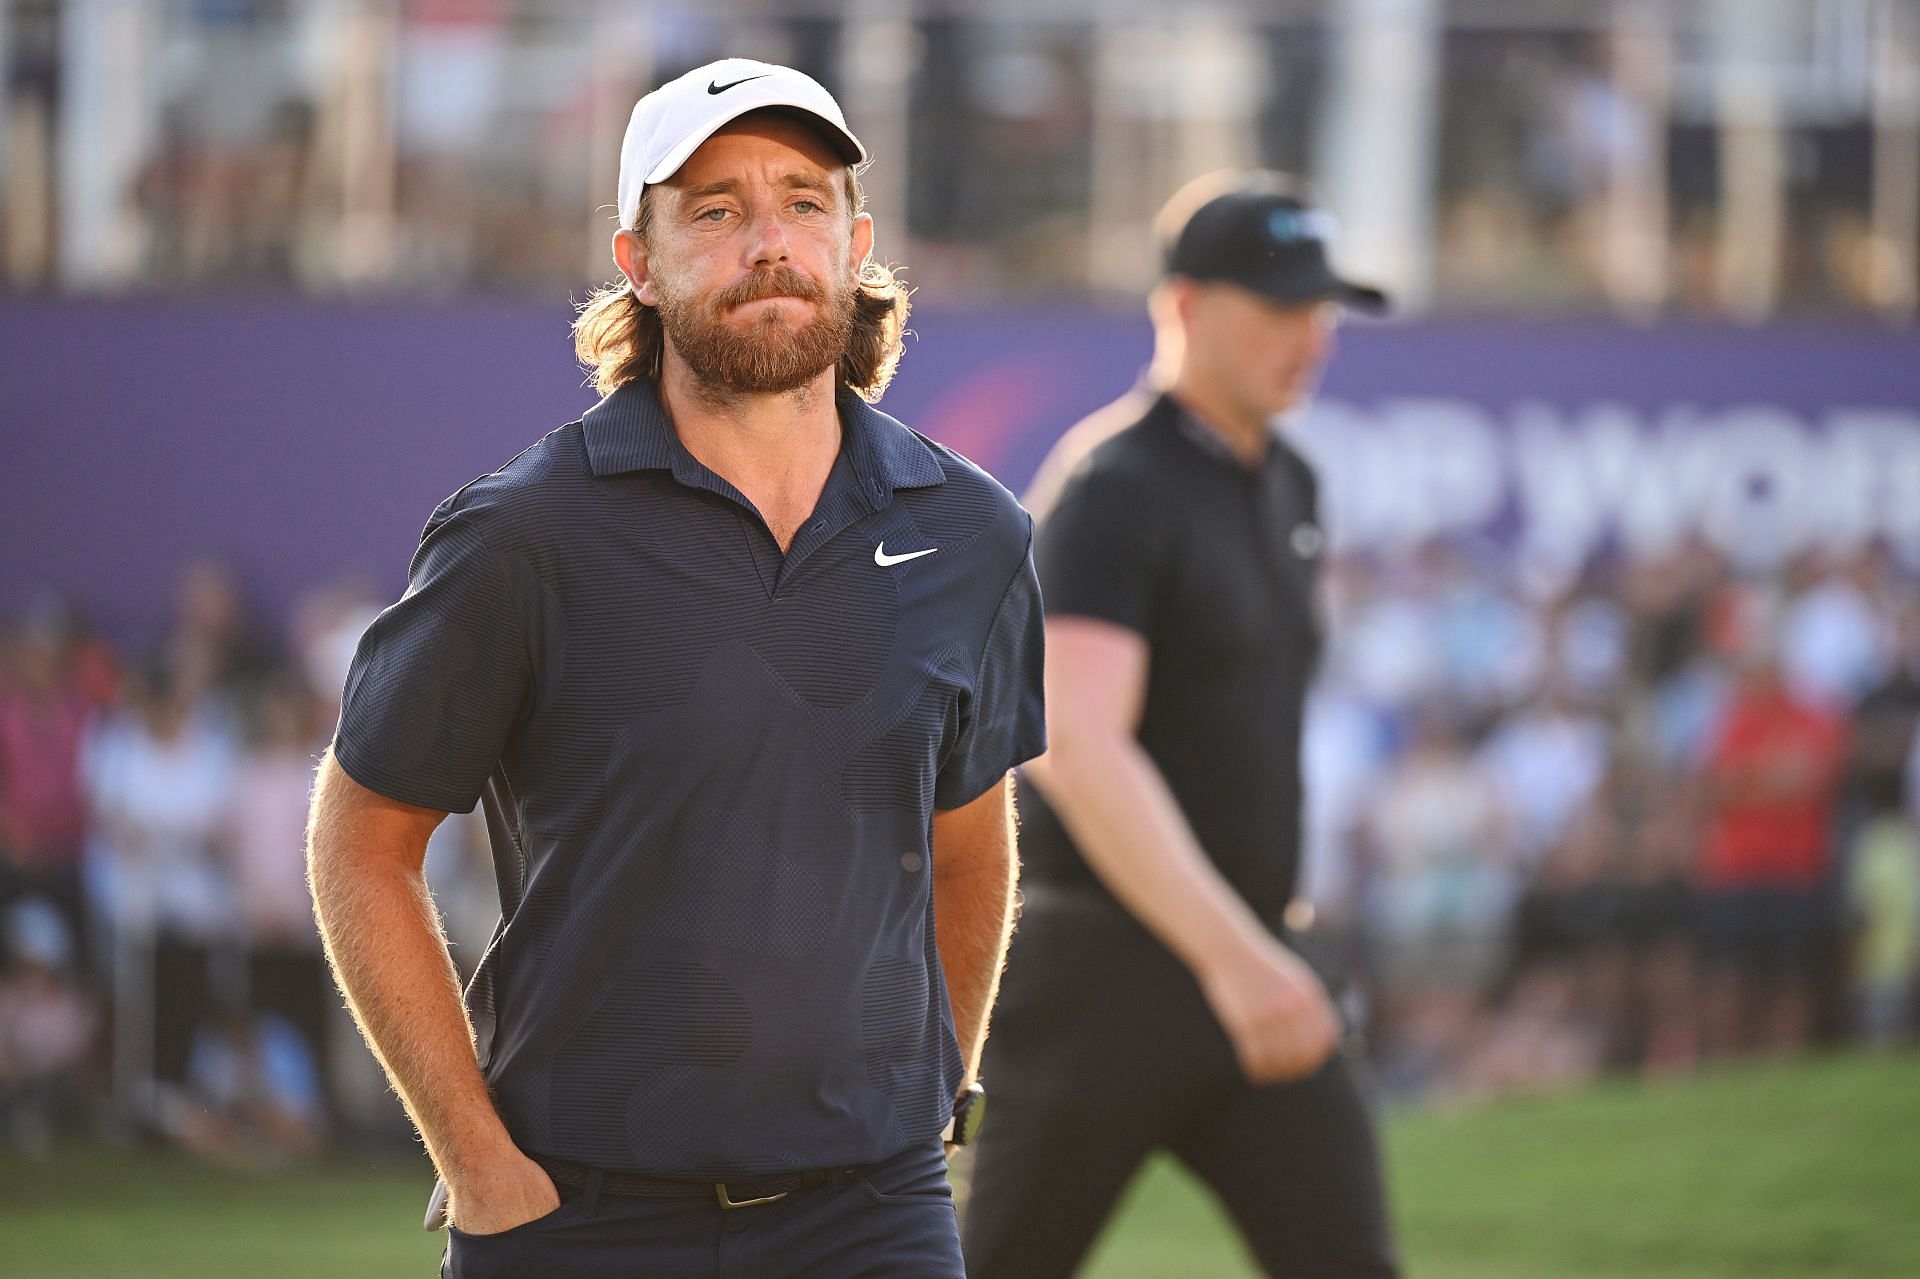 Tommy Fleetwood could be a Ryder Cup captain soon